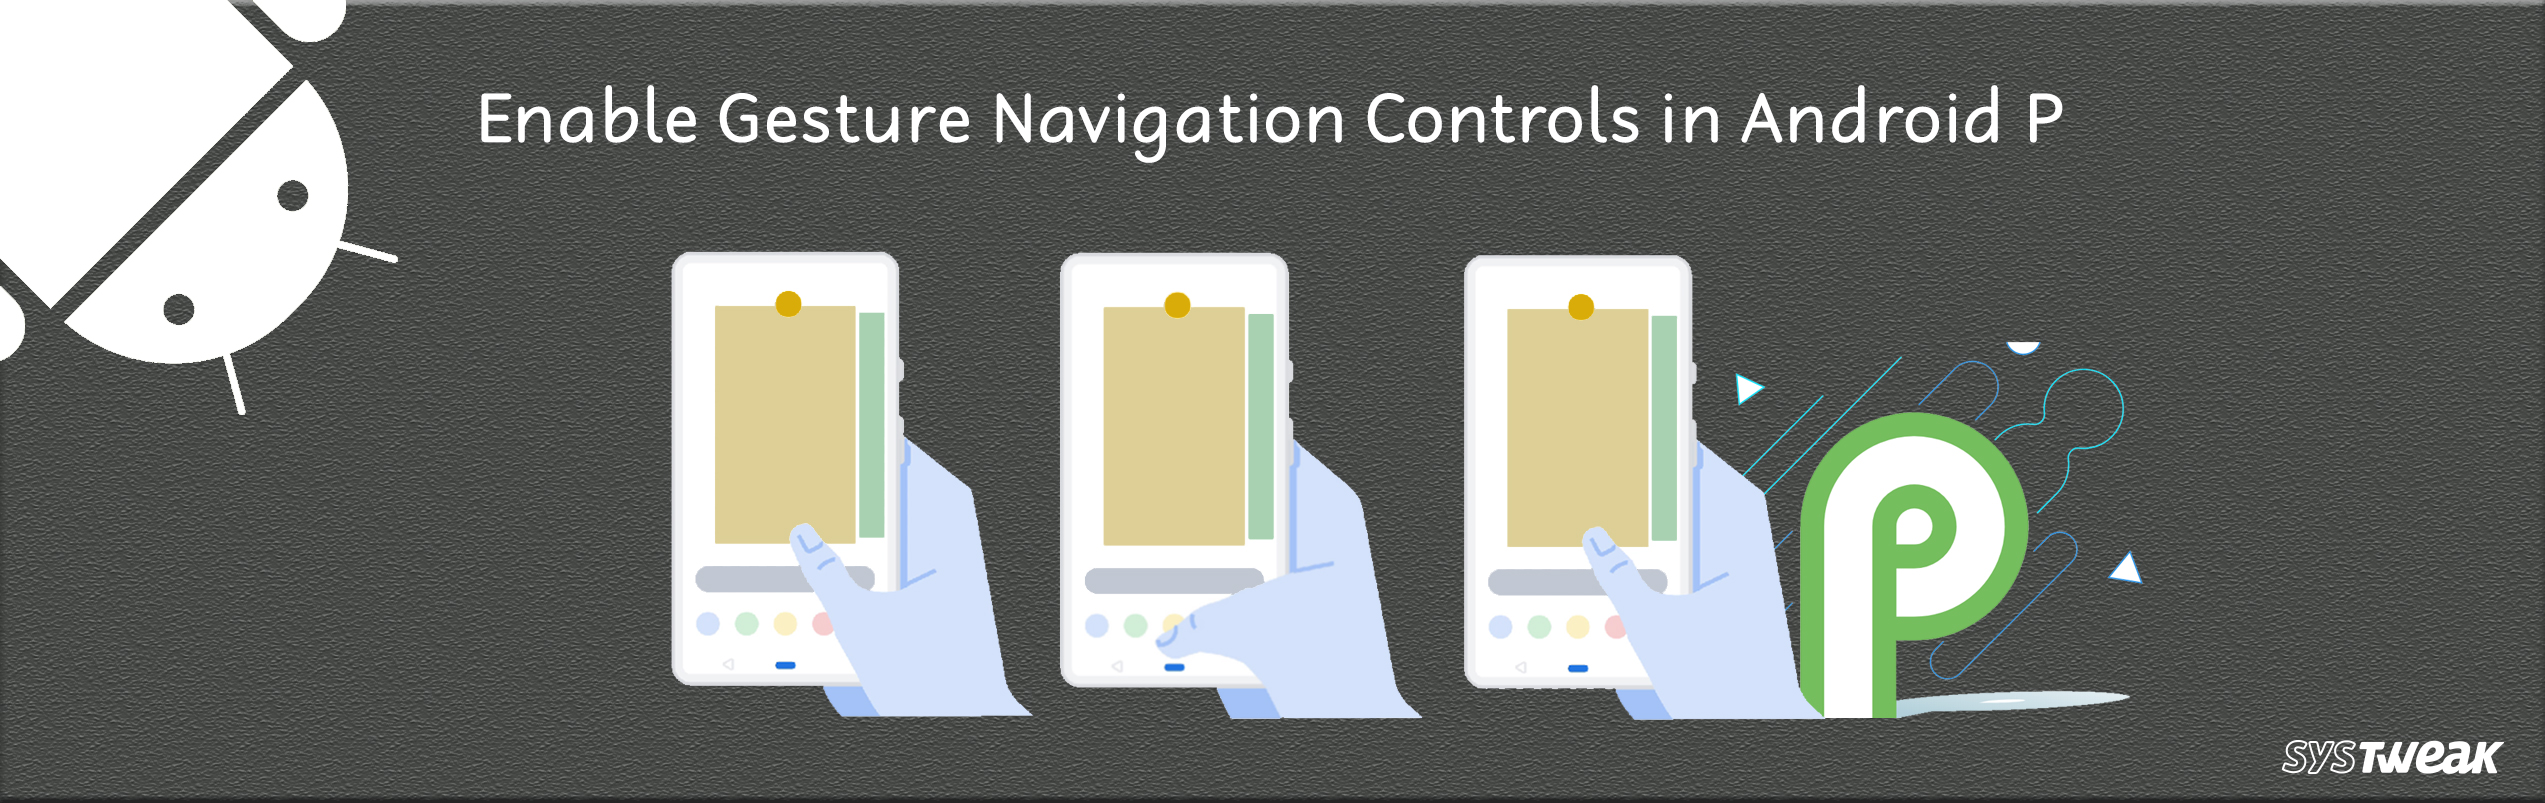 How To Enable Gesture Navigation Controls In Android P